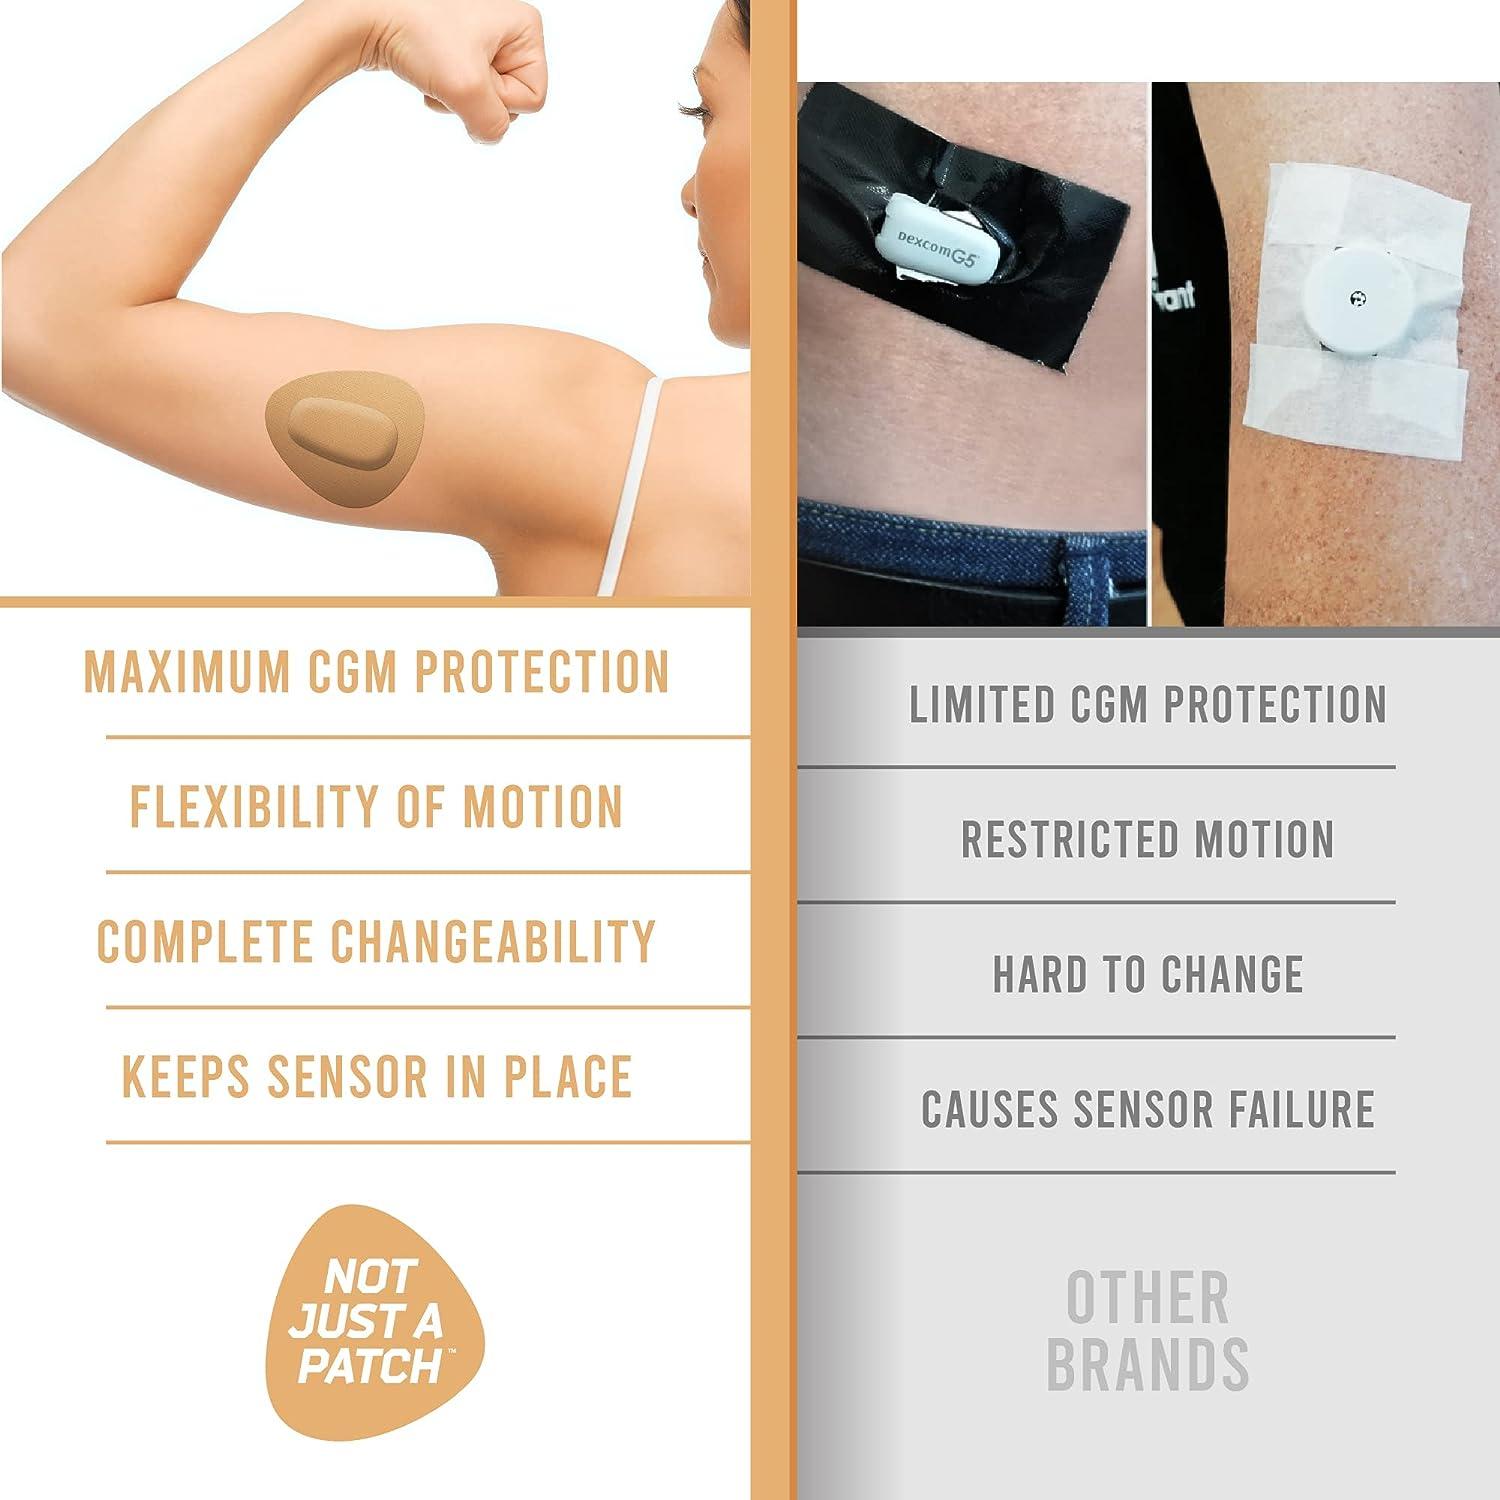 Not Just A Patch Dexcom G6 Adhesive Patches (20 Pack) - Dexcom G6 Stickers  Adhesive Patches for Skin - Water Resistant Dexcom Overpatch G6 for Active  Lifestyle 10-14 Days - Beige